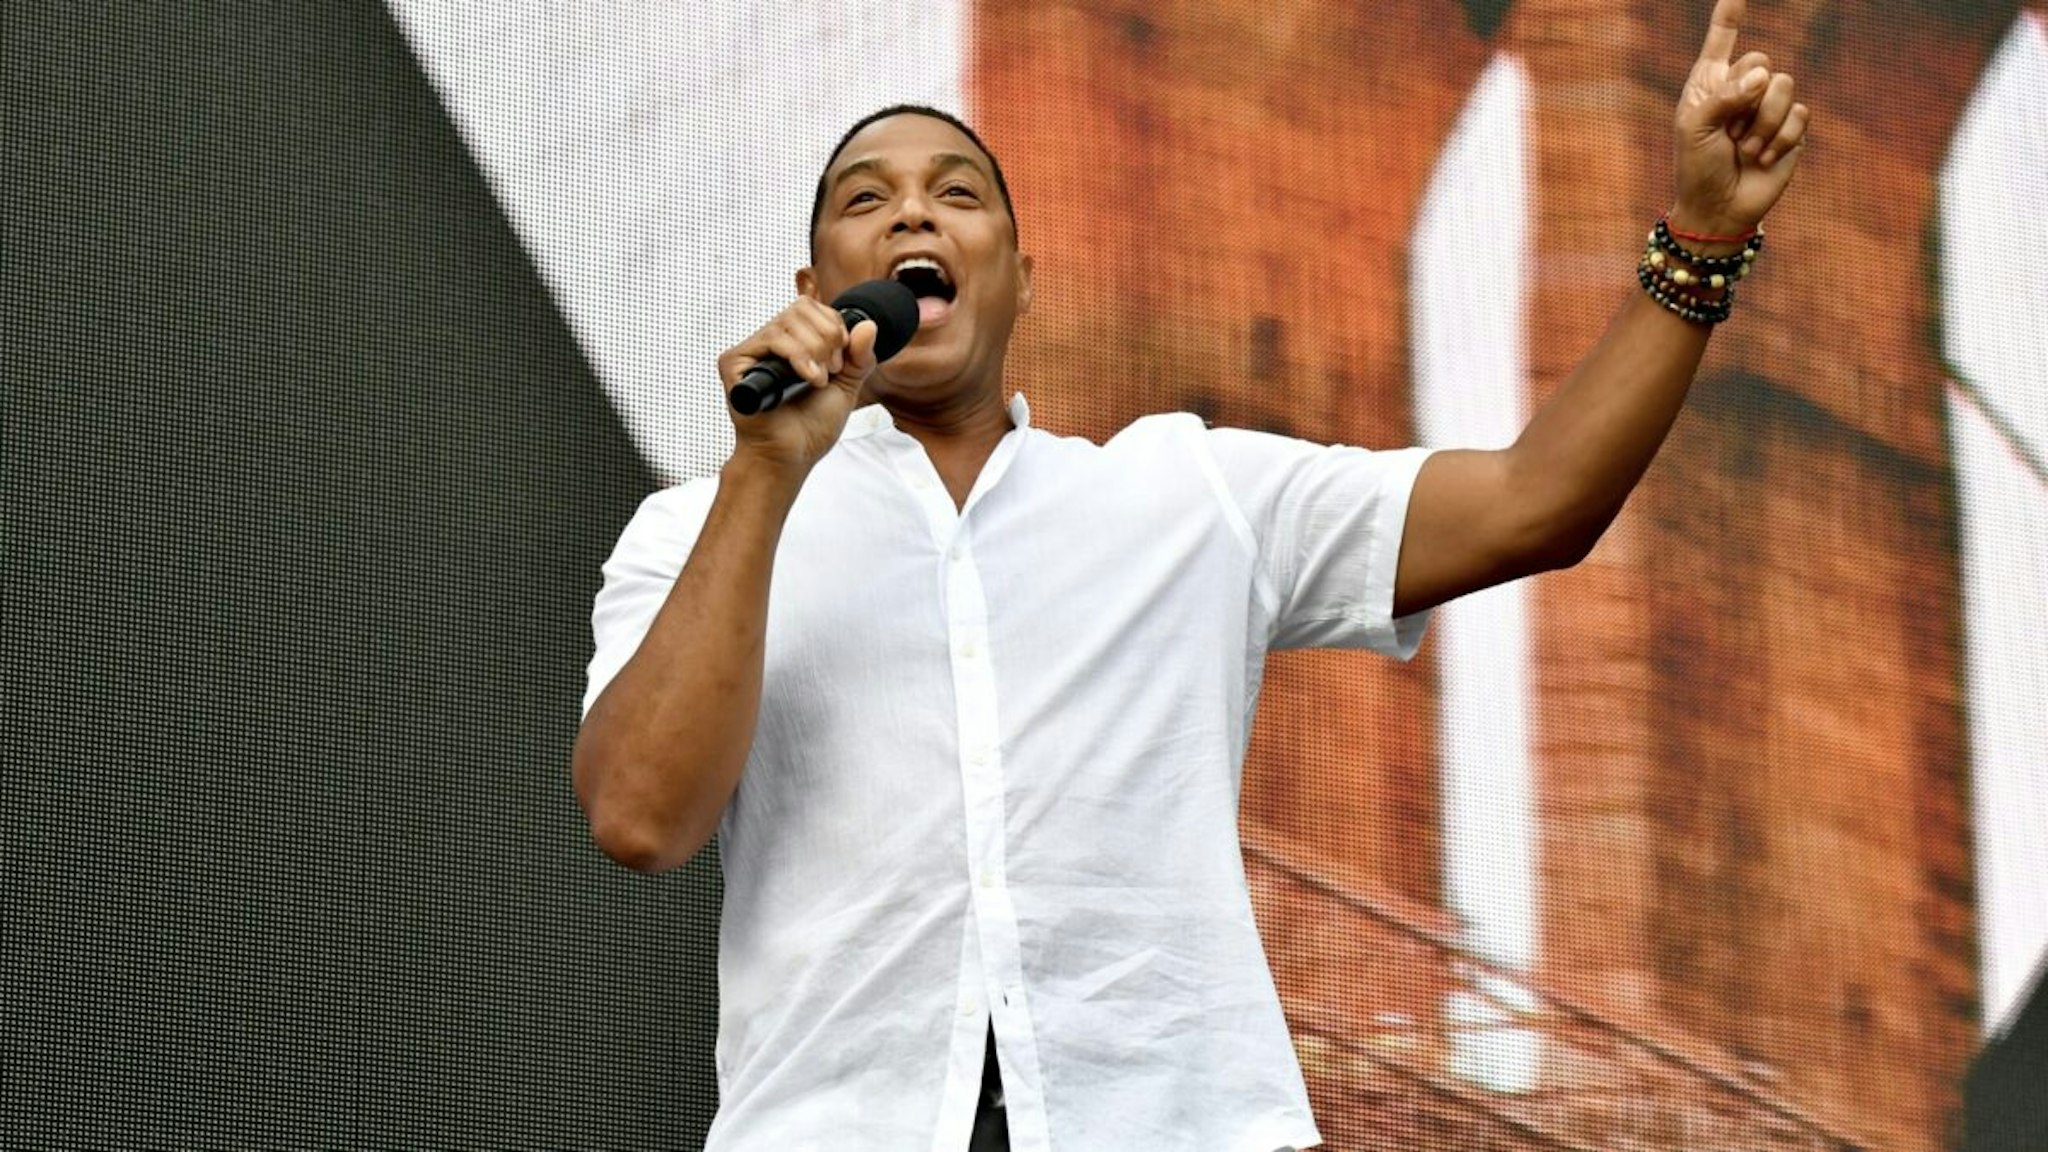 on Lemon speaks onstage during We Love NYC: The Homecoming Concert Produced by NYC, Clive Davis, and Live Nation on August 21, 2021 in New York City.